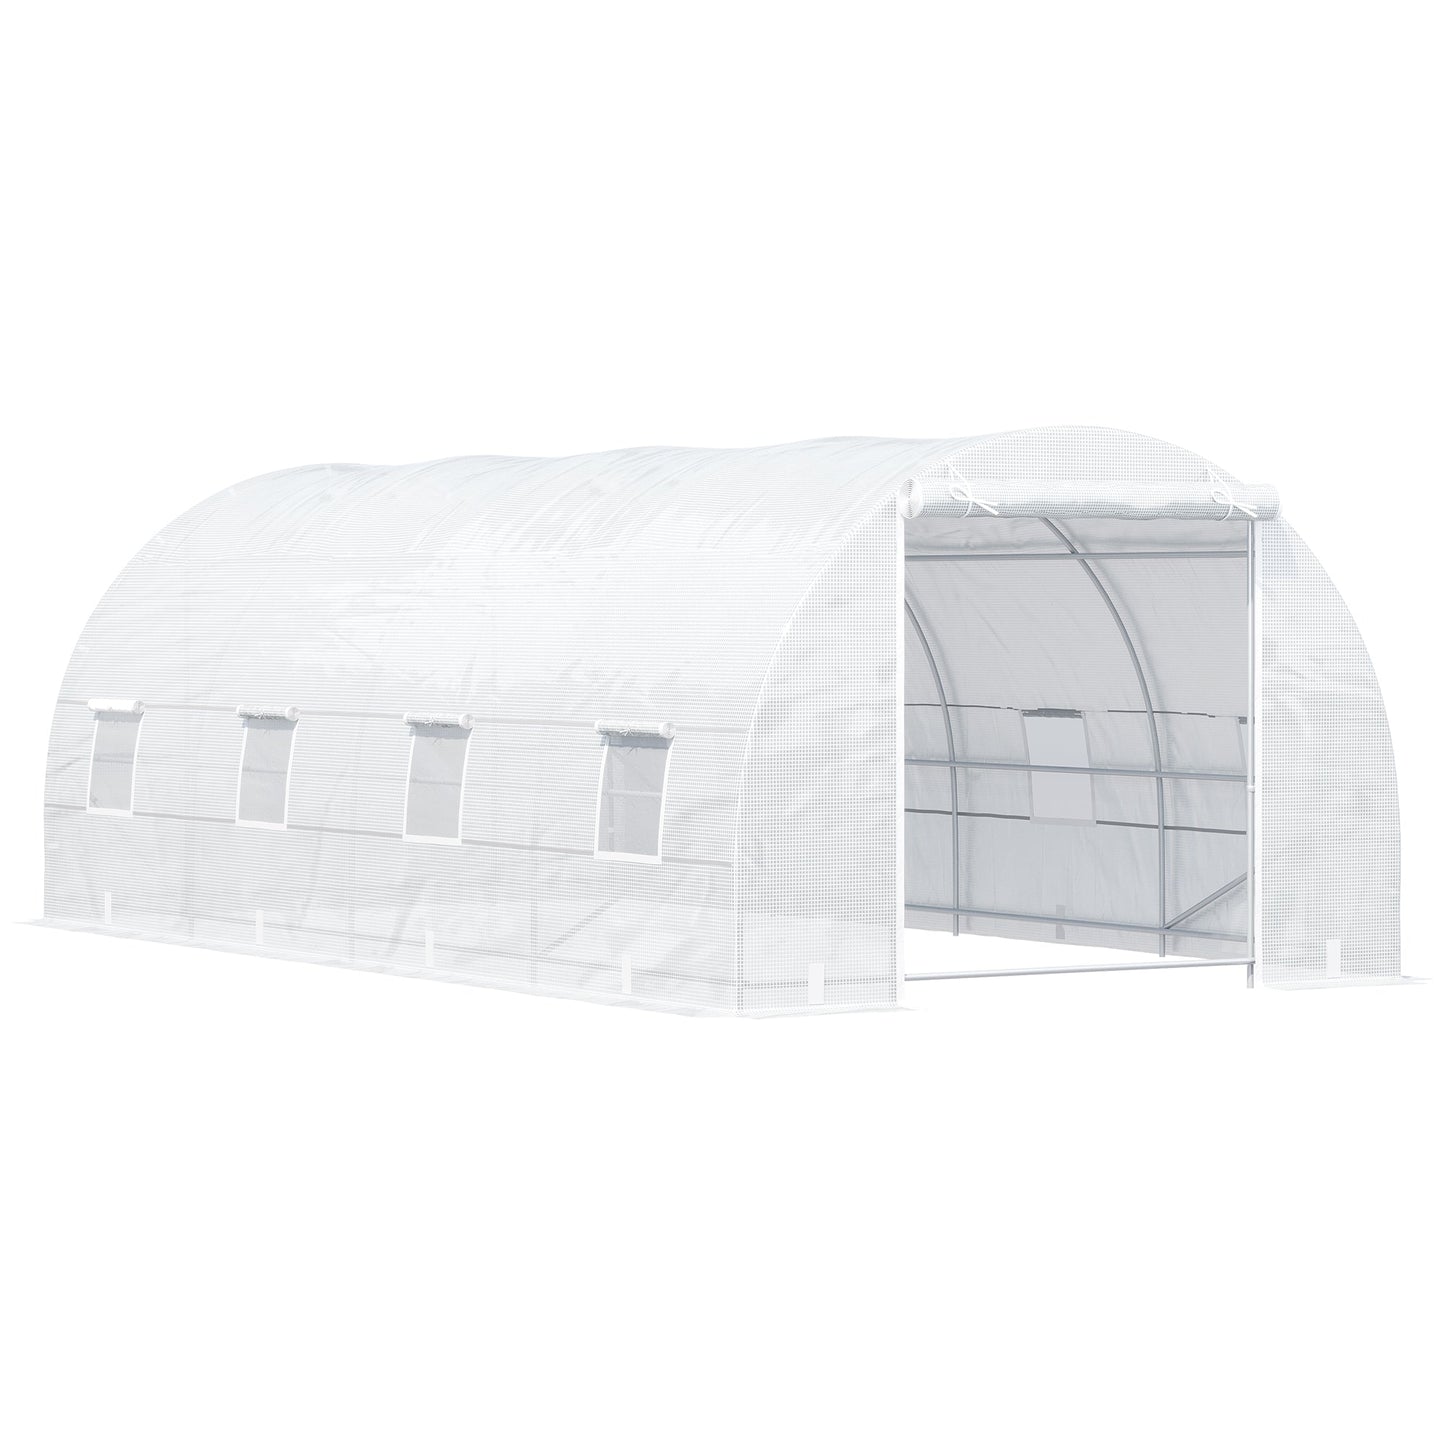 Miscellaneous-20’x10’x7’ Freestanding High Tunnel Greenhouse Kit, Large Hot House with Footprint & Tough PE Walls, White - Outdoor Style Company